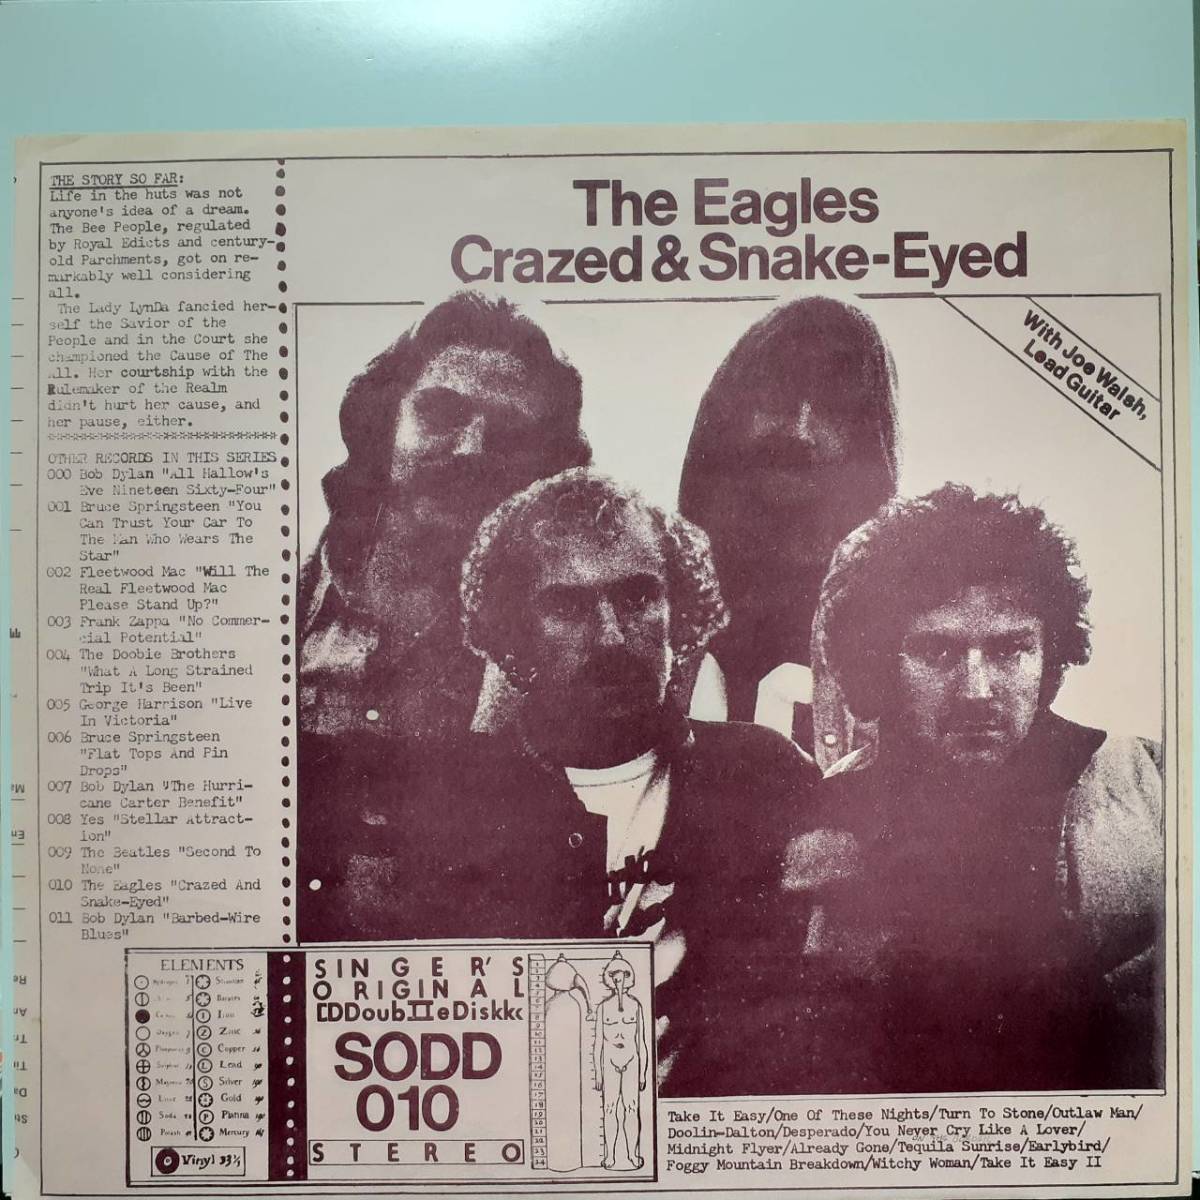  rice private record 2LP!Eagles / Crazed&Snake-Eyed with Joe Walsh 73~76 year. LIVE record!SODD 010 Take It Easy Desperado compilation! Eagle s